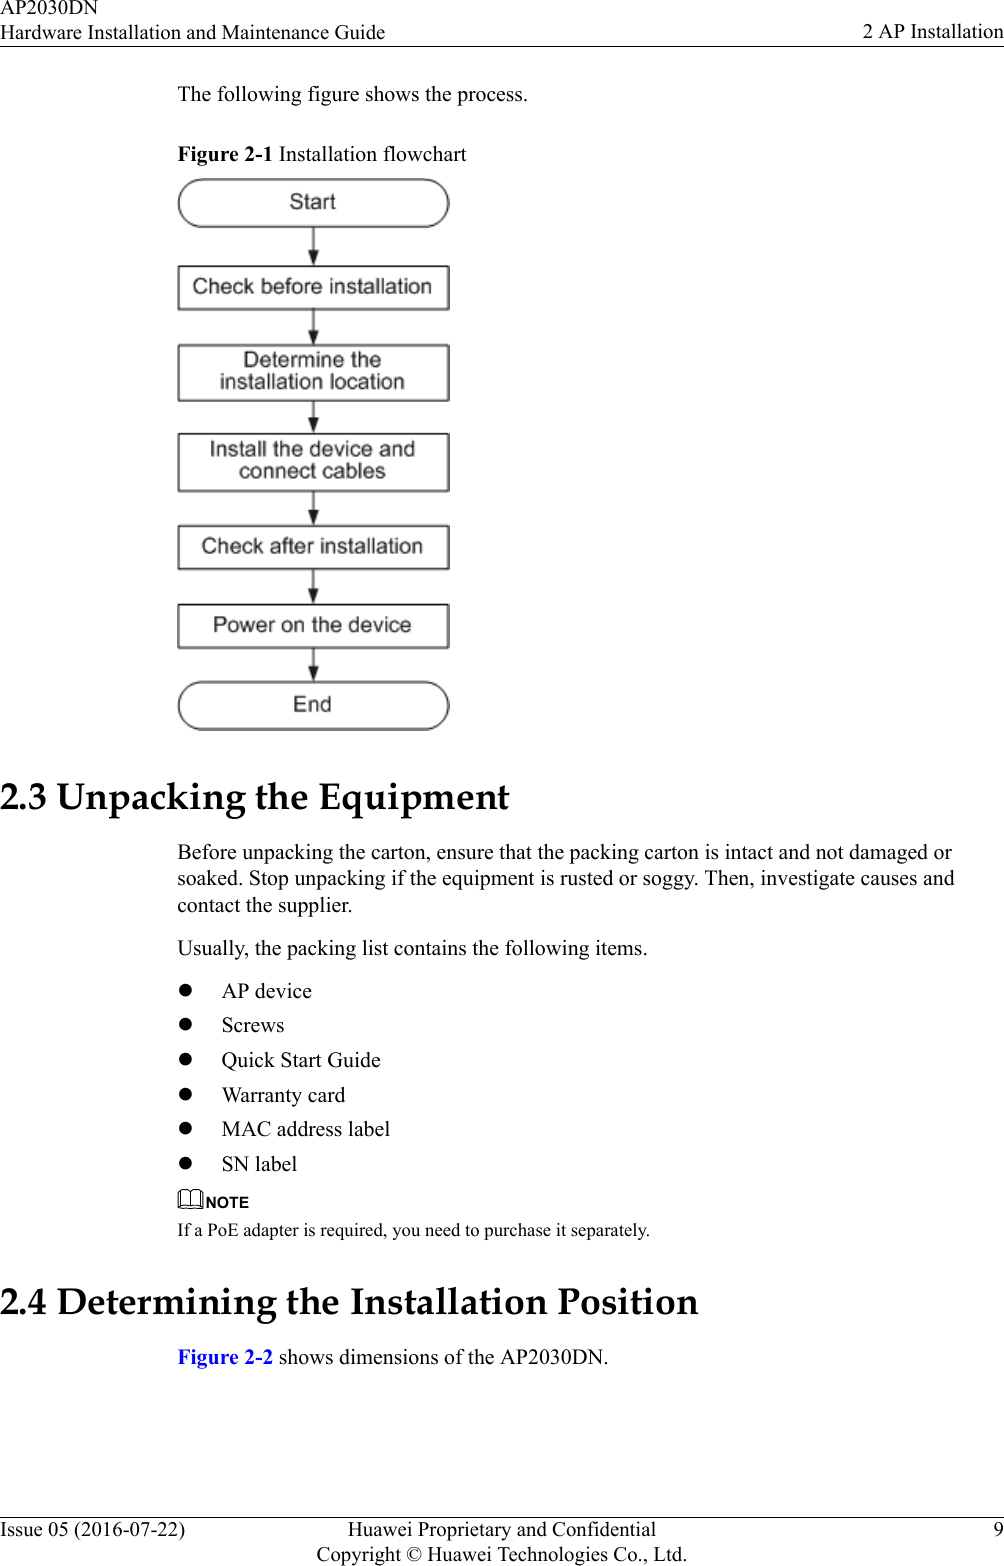 The following figure shows the process.Figure 2-1 Installation flowchart2.3 Unpacking the EquipmentBefore unpacking the carton, ensure that the packing carton is intact and not damaged orsoaked. Stop unpacking if the equipment is rusted or soggy. Then, investigate causes andcontact the supplier.Usually, the packing list contains the following items.lAP devicelScrewslQuick Start GuidelWarranty cardlMAC address labellSN labelNOTEIf a PoE adapter is required, you need to purchase it separately.2.4 Determining the Installation PositionFigure 2-2 shows dimensions of the AP2030DN.AP2030DNHardware Installation and Maintenance Guide 2 AP InstallationIssue 05 (2016-07-22) Huawei Proprietary and ConfidentialCopyright © Huawei Technologies Co., Ltd.9